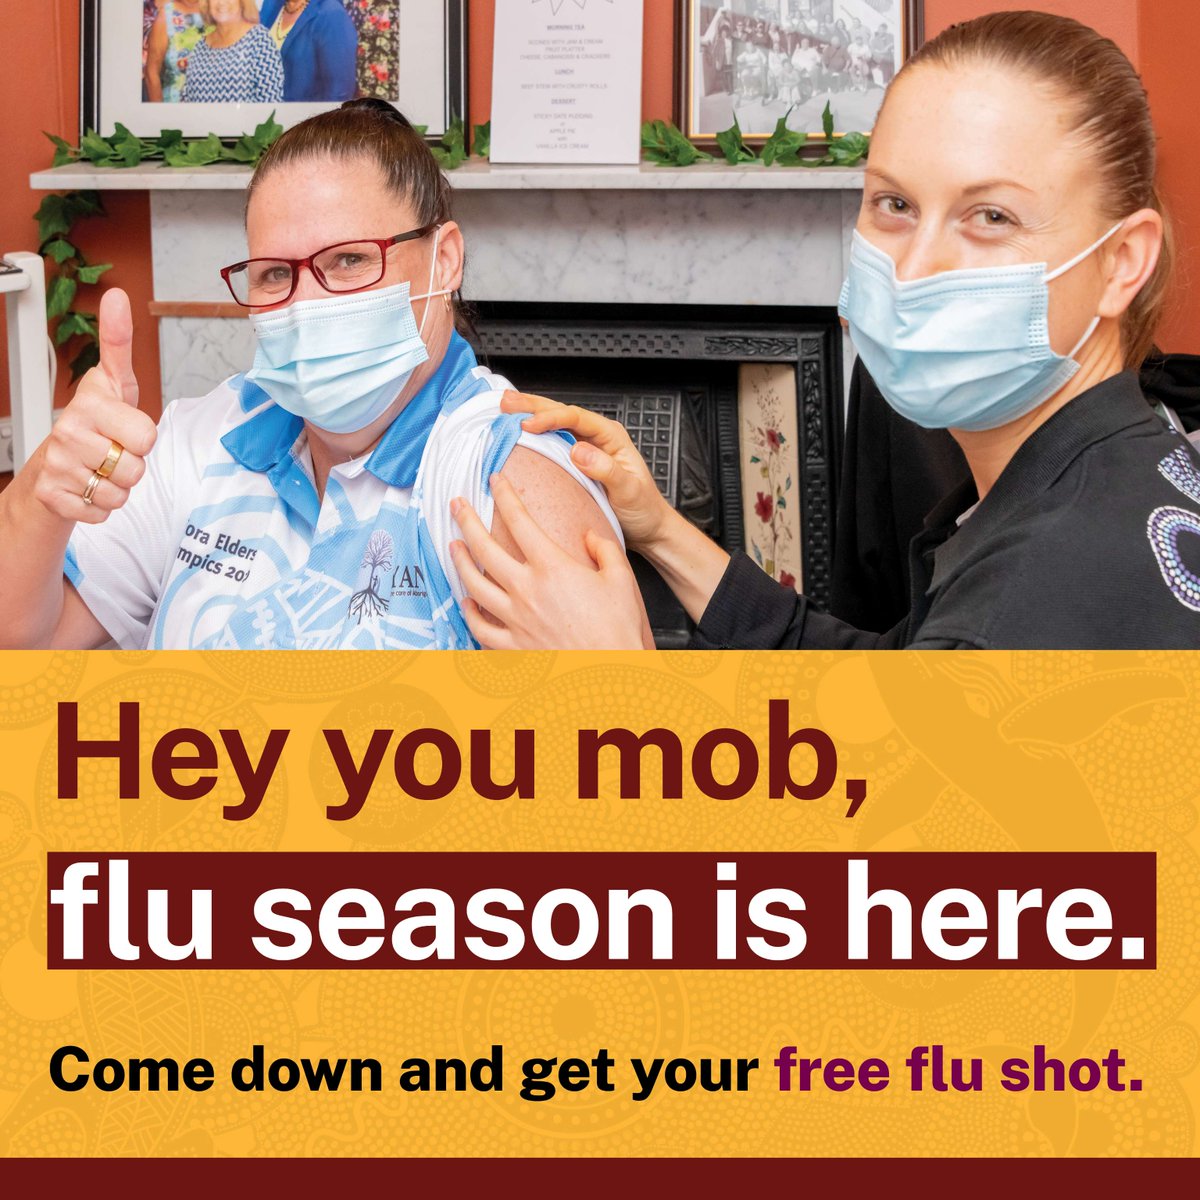 The flu vaccine is free for all Aboriginal people aged 6 months and older. Come along to get your free flu vaccination tomorrow at Redfern Health Centre from 10am-6pm. The flu vaccine is quick, easy and safe and the best way to stop you from getting really sick.